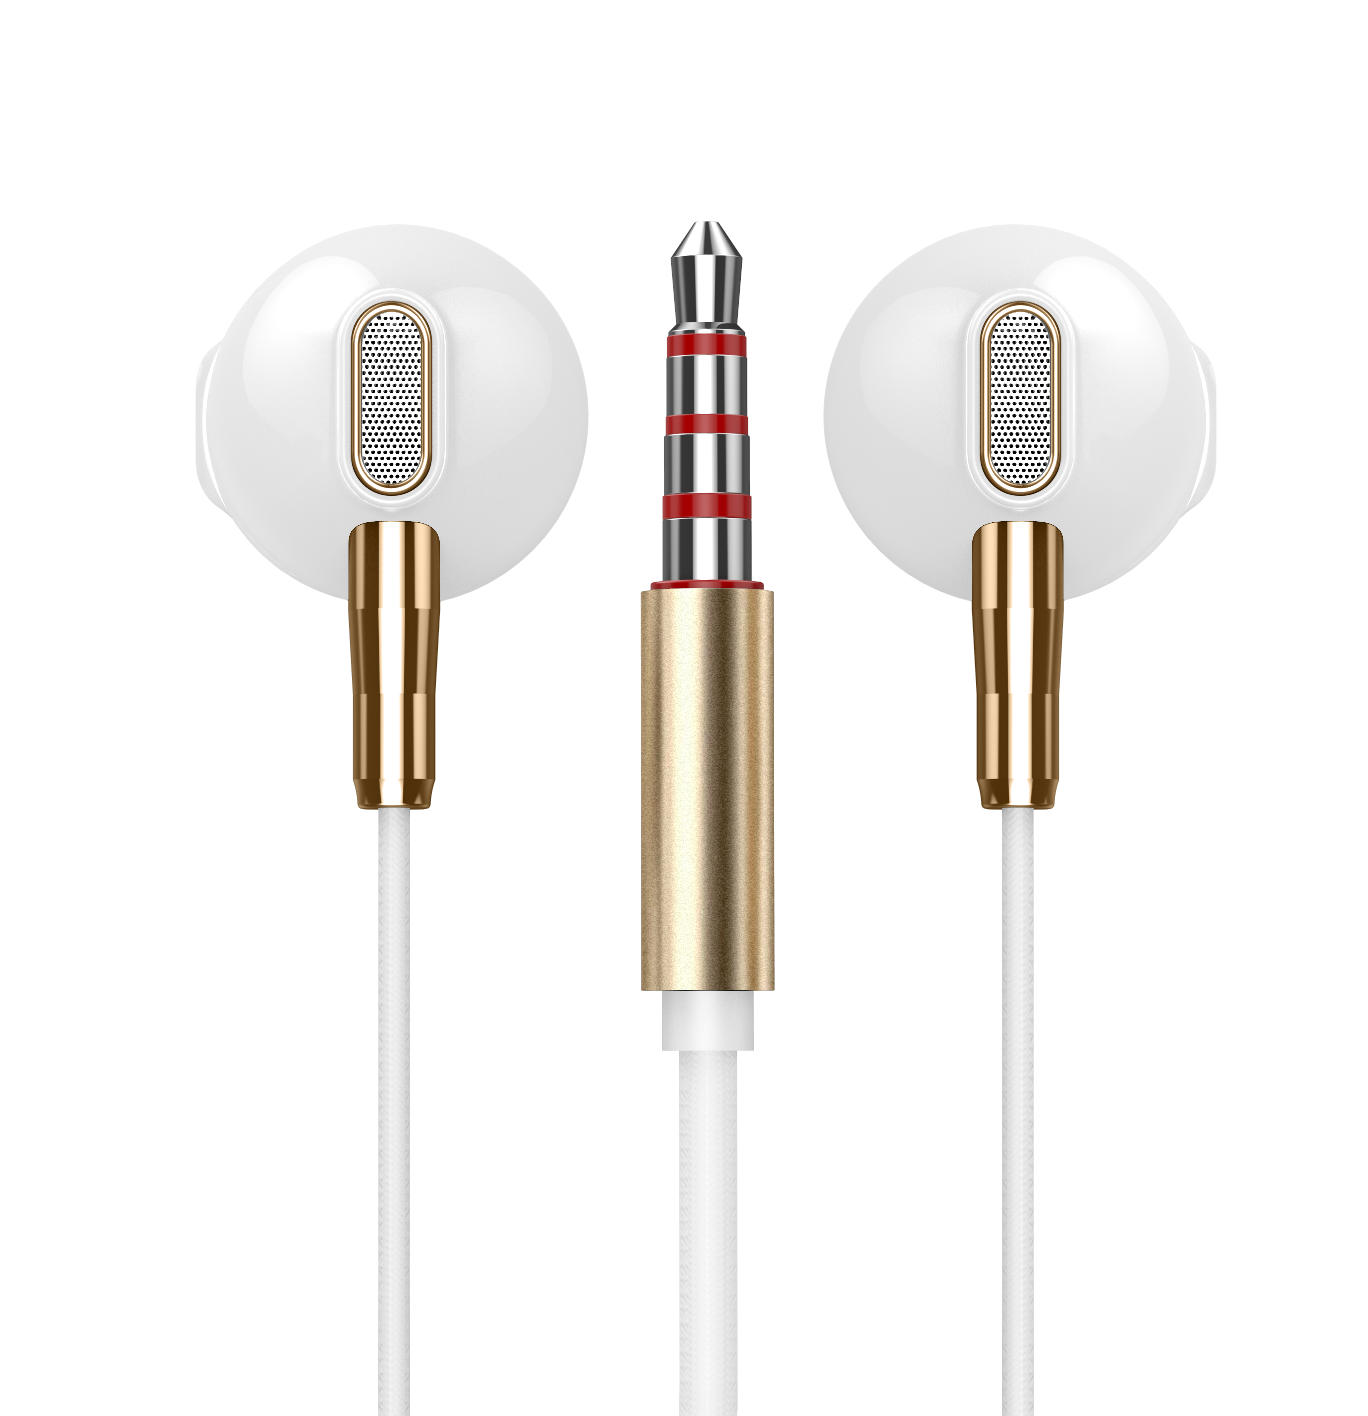 Cheaper Wholesale Noise reduction In Ear Earphone Super Bass Stereo wired Earphones Microphone Sport Running Earbuds